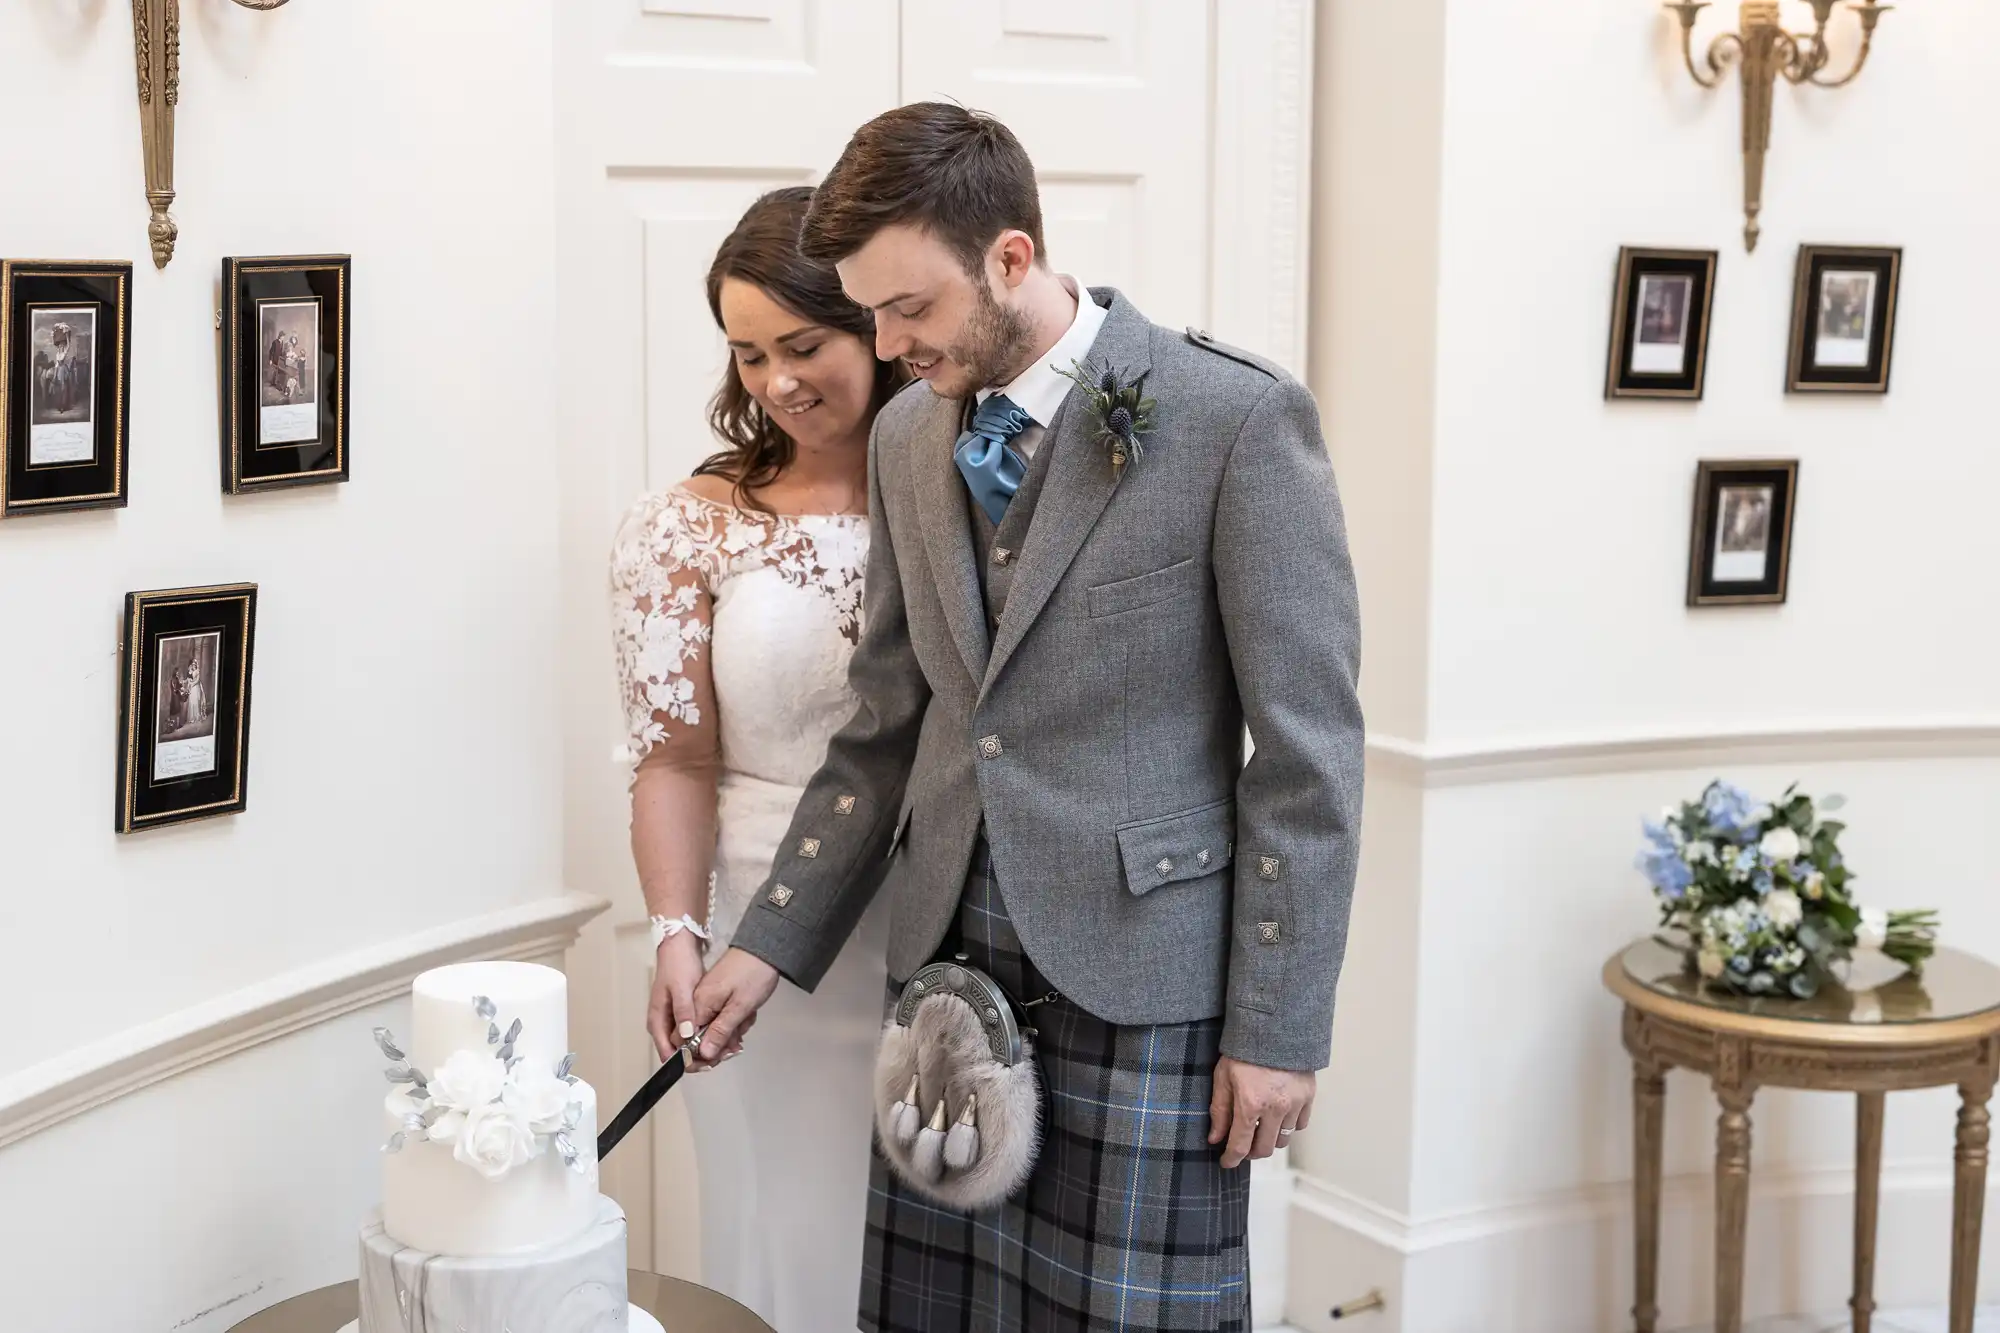 A couple in wedding attire, the man in a kilt, and the woman in a white dress, smiling as they cut a cake together in a room decorated with framed photos.